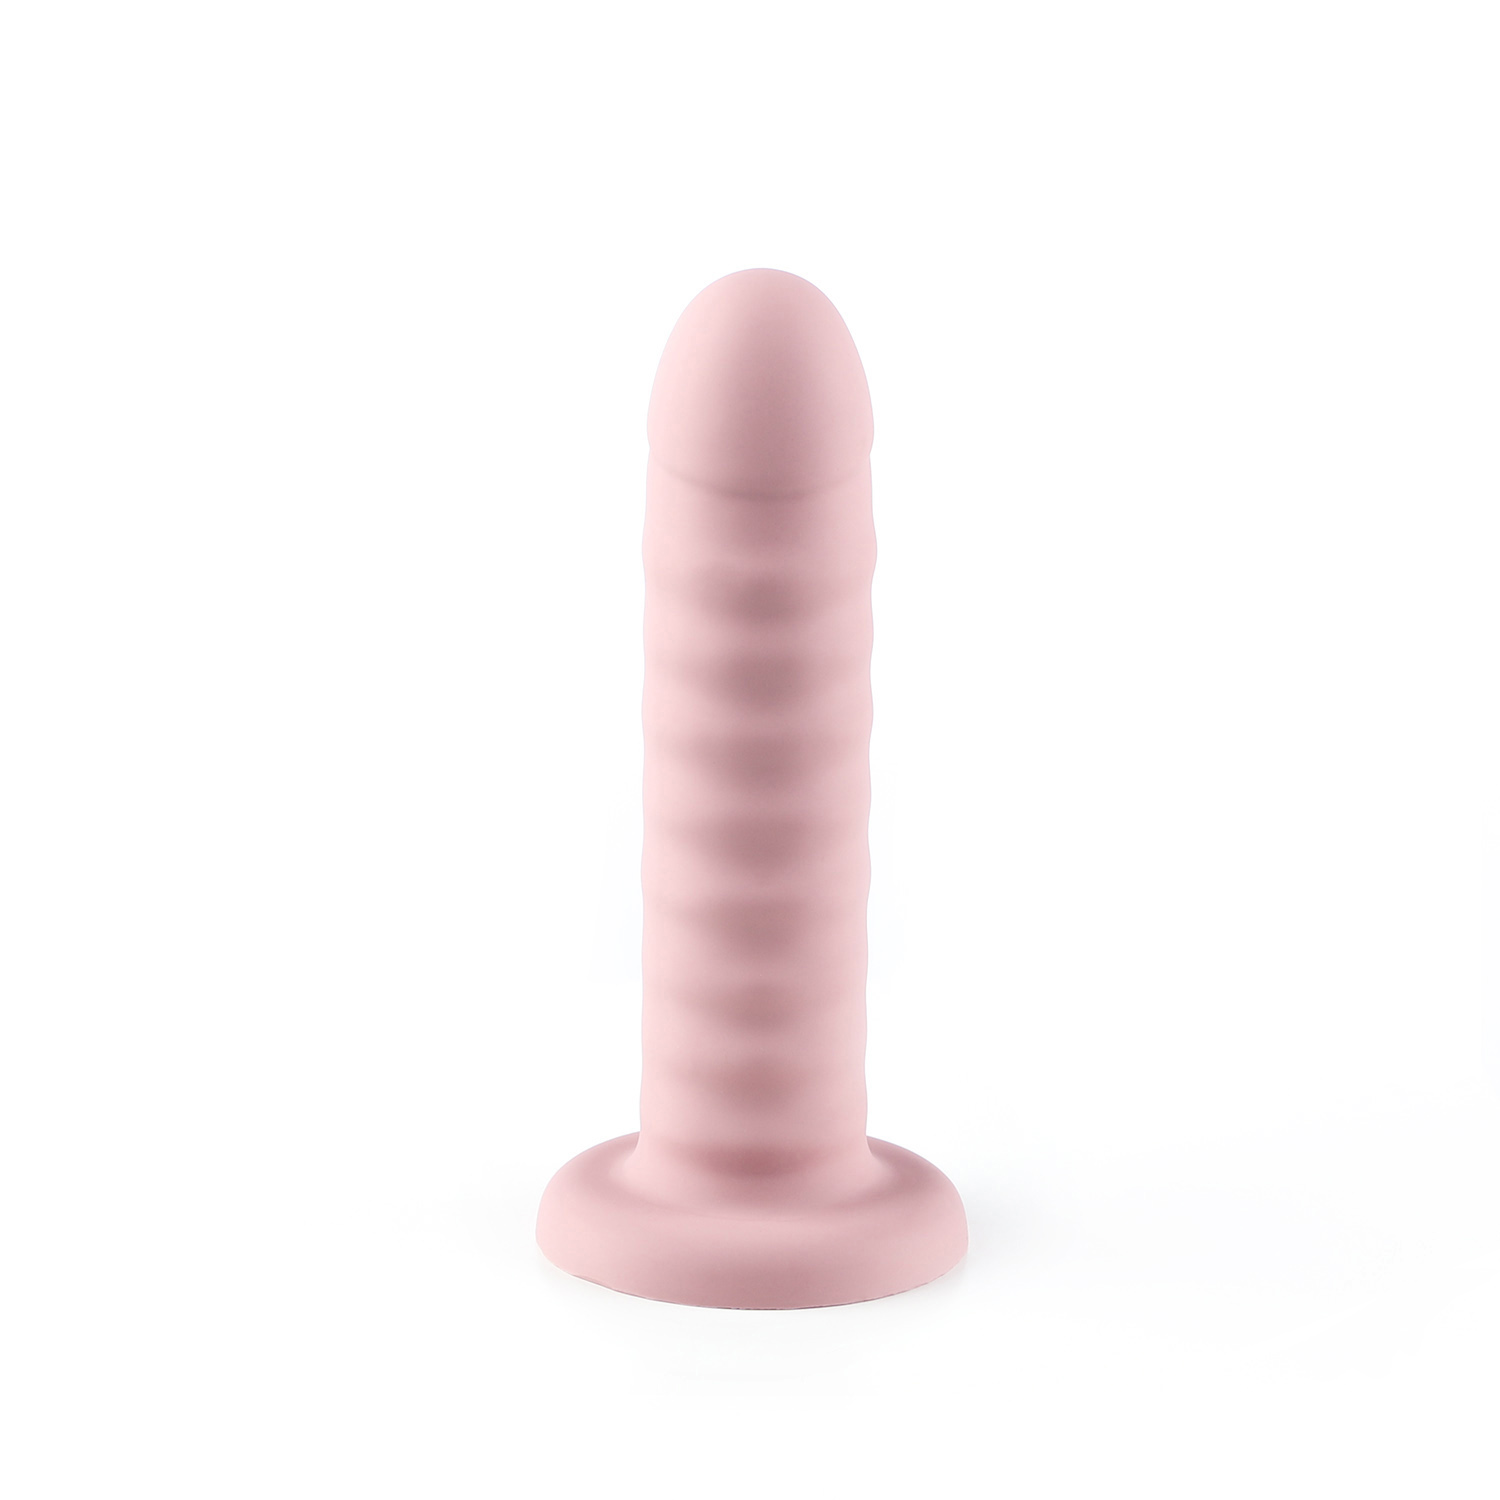 STRAP-ON DILDO CATER IN PINK